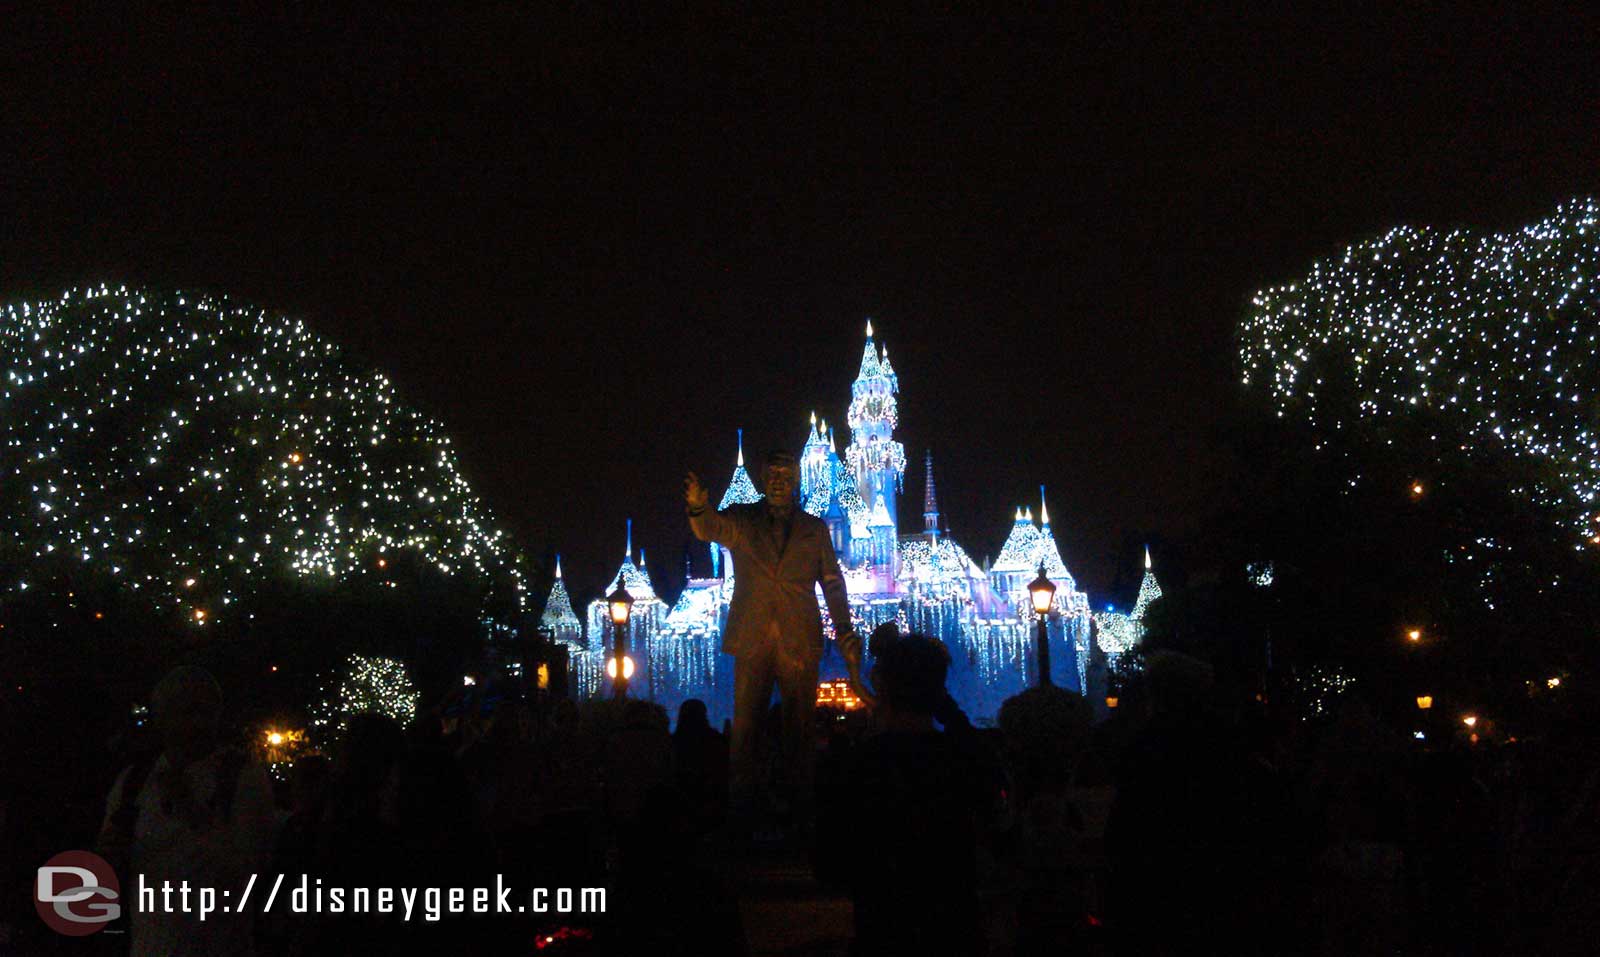 Sleeping Beauty Castle during a Wintertime Enchantment snow moment